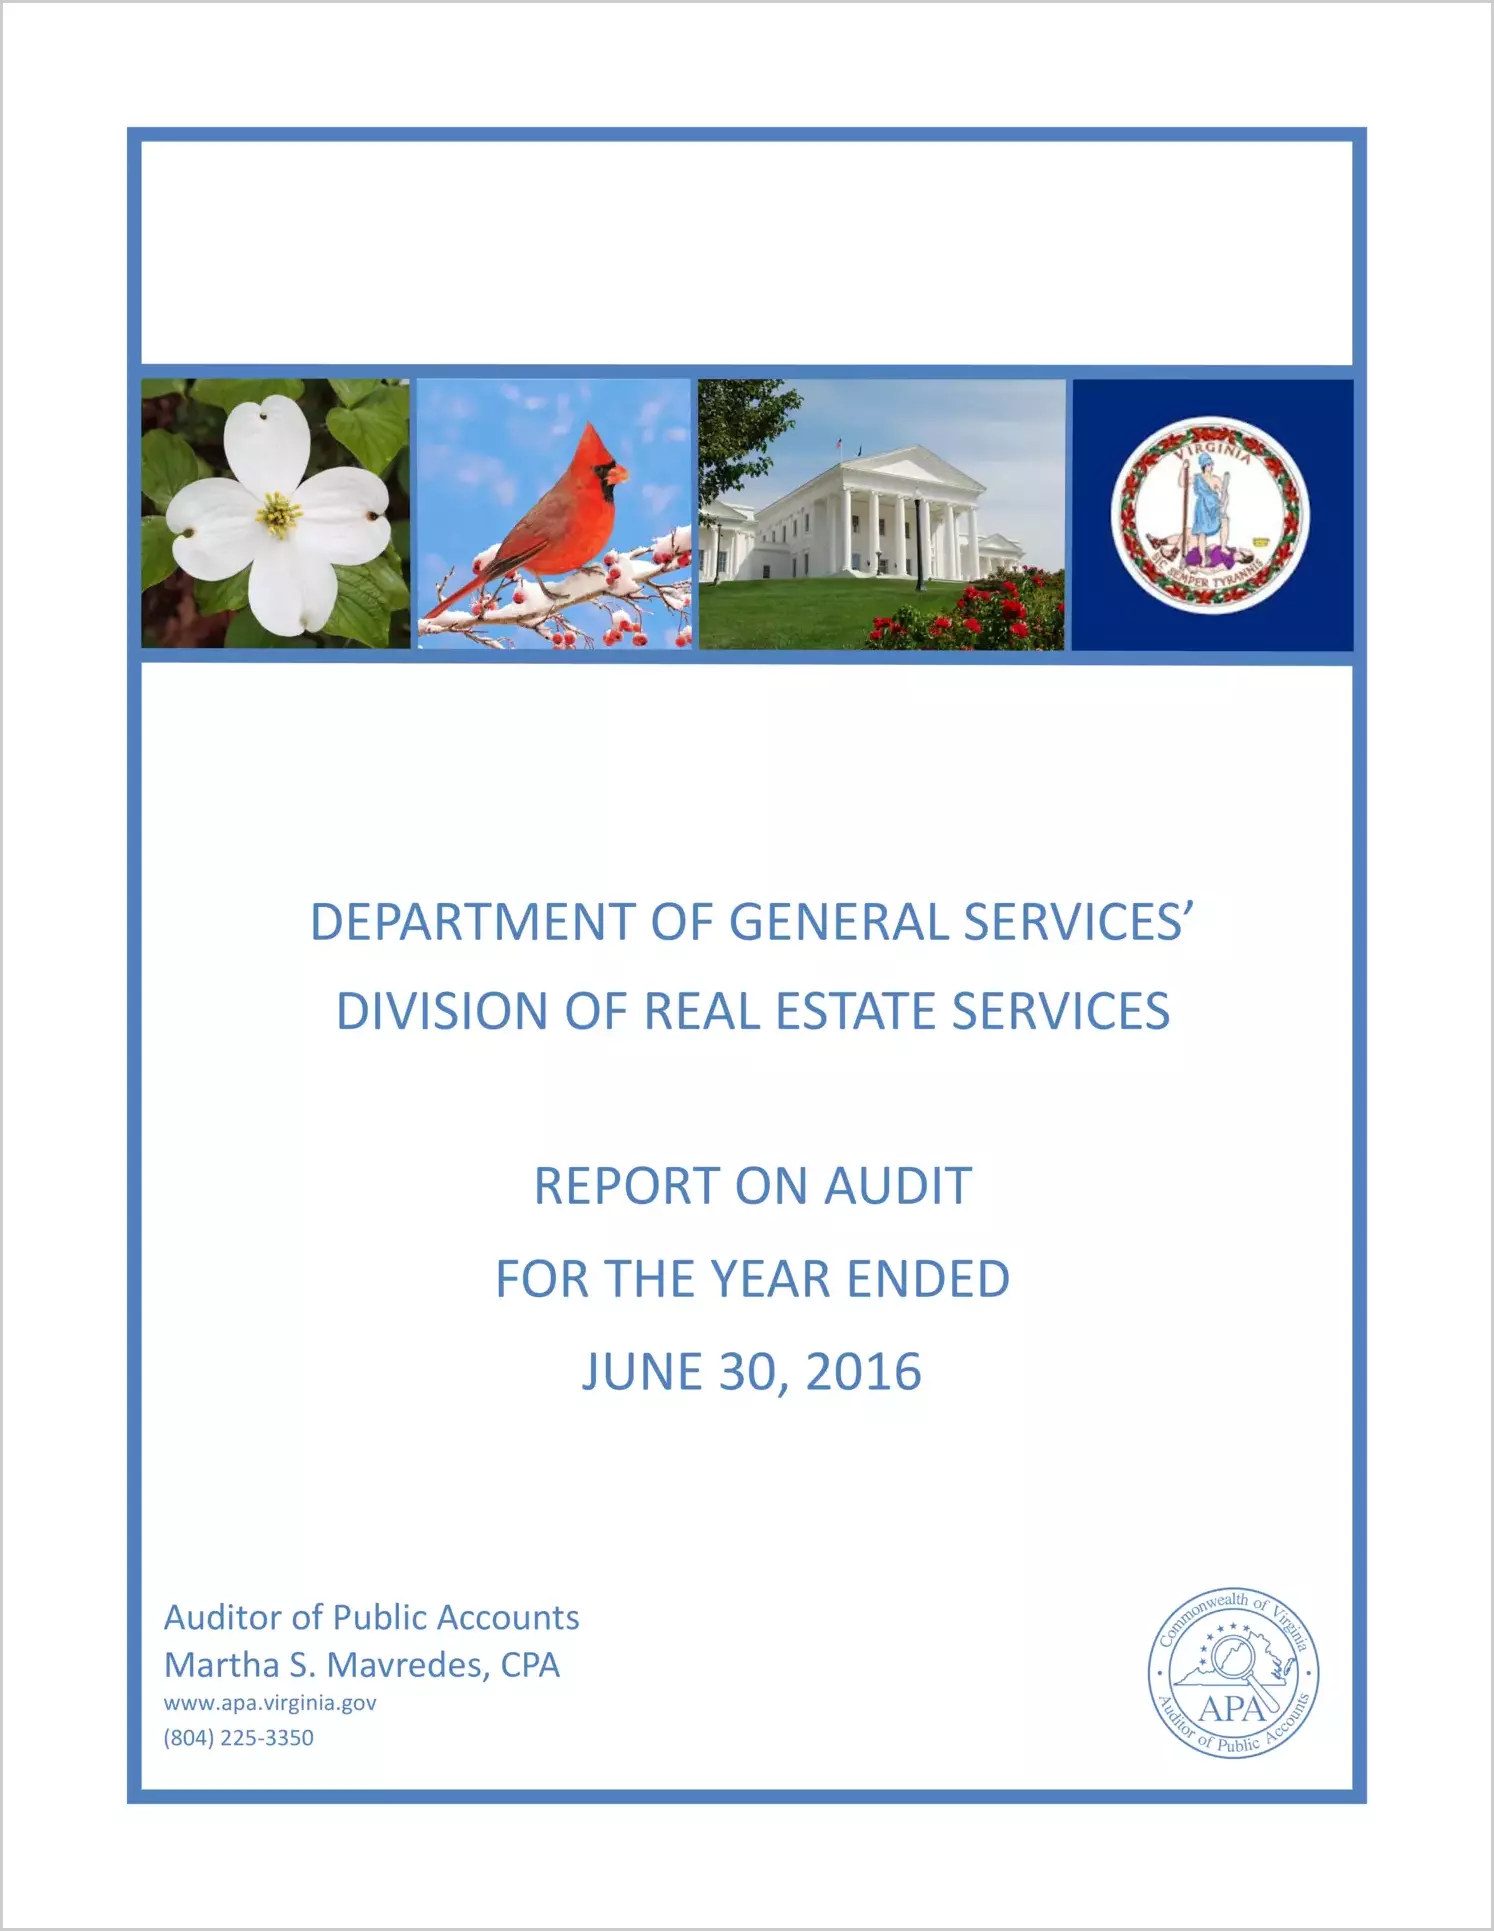 Department of General Service's Division of Real Estate Services for the year ended June 30, 2016